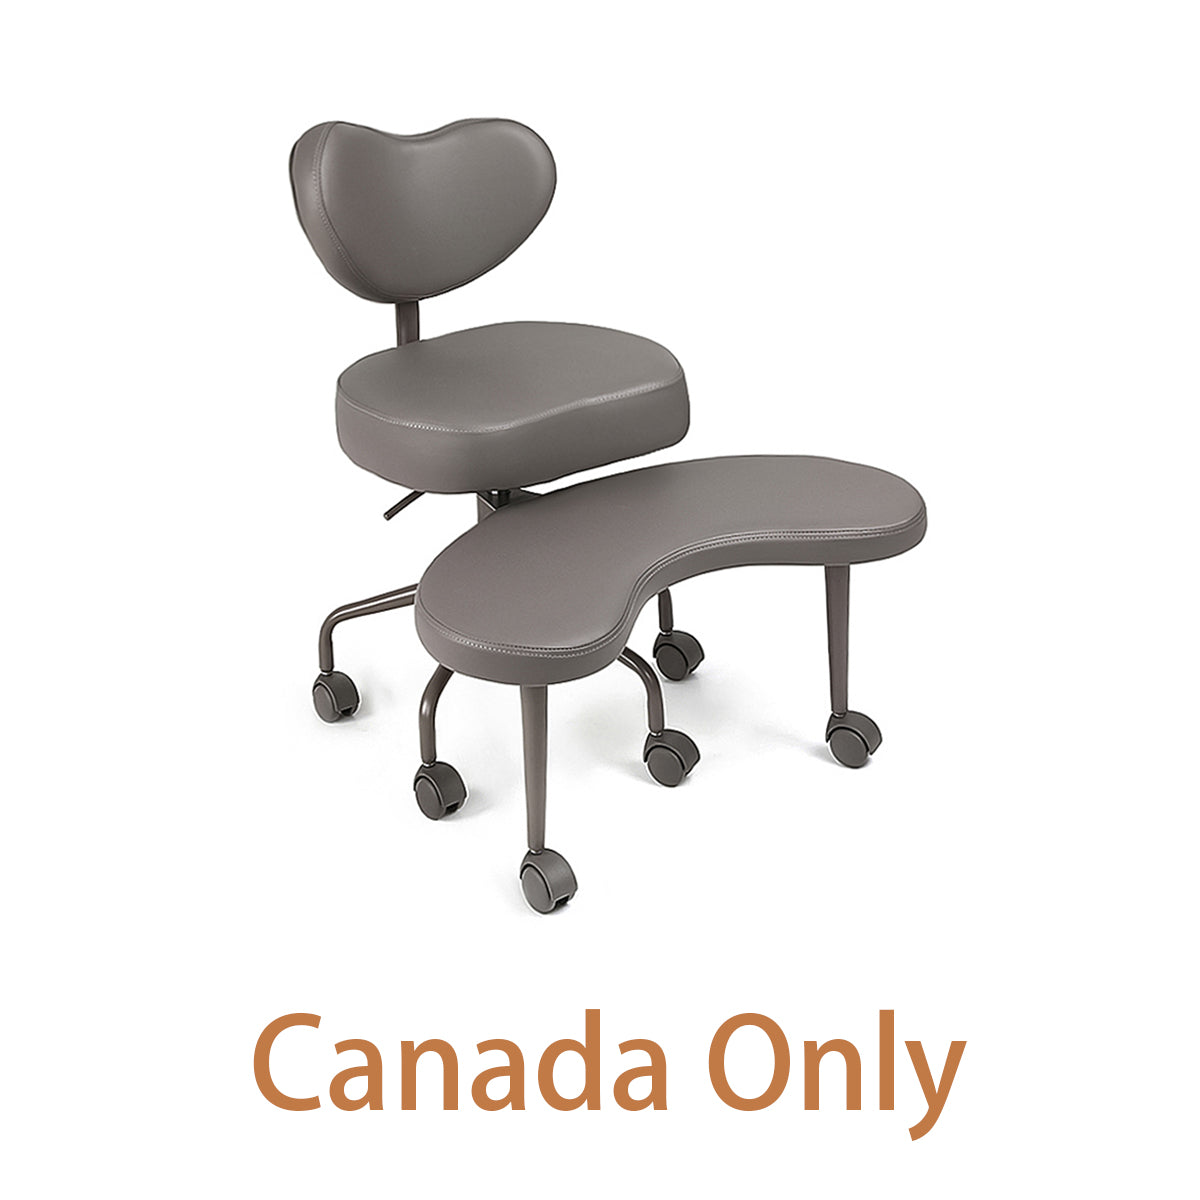 FINAL SALE - Pipersong Meditation Chair [Used]